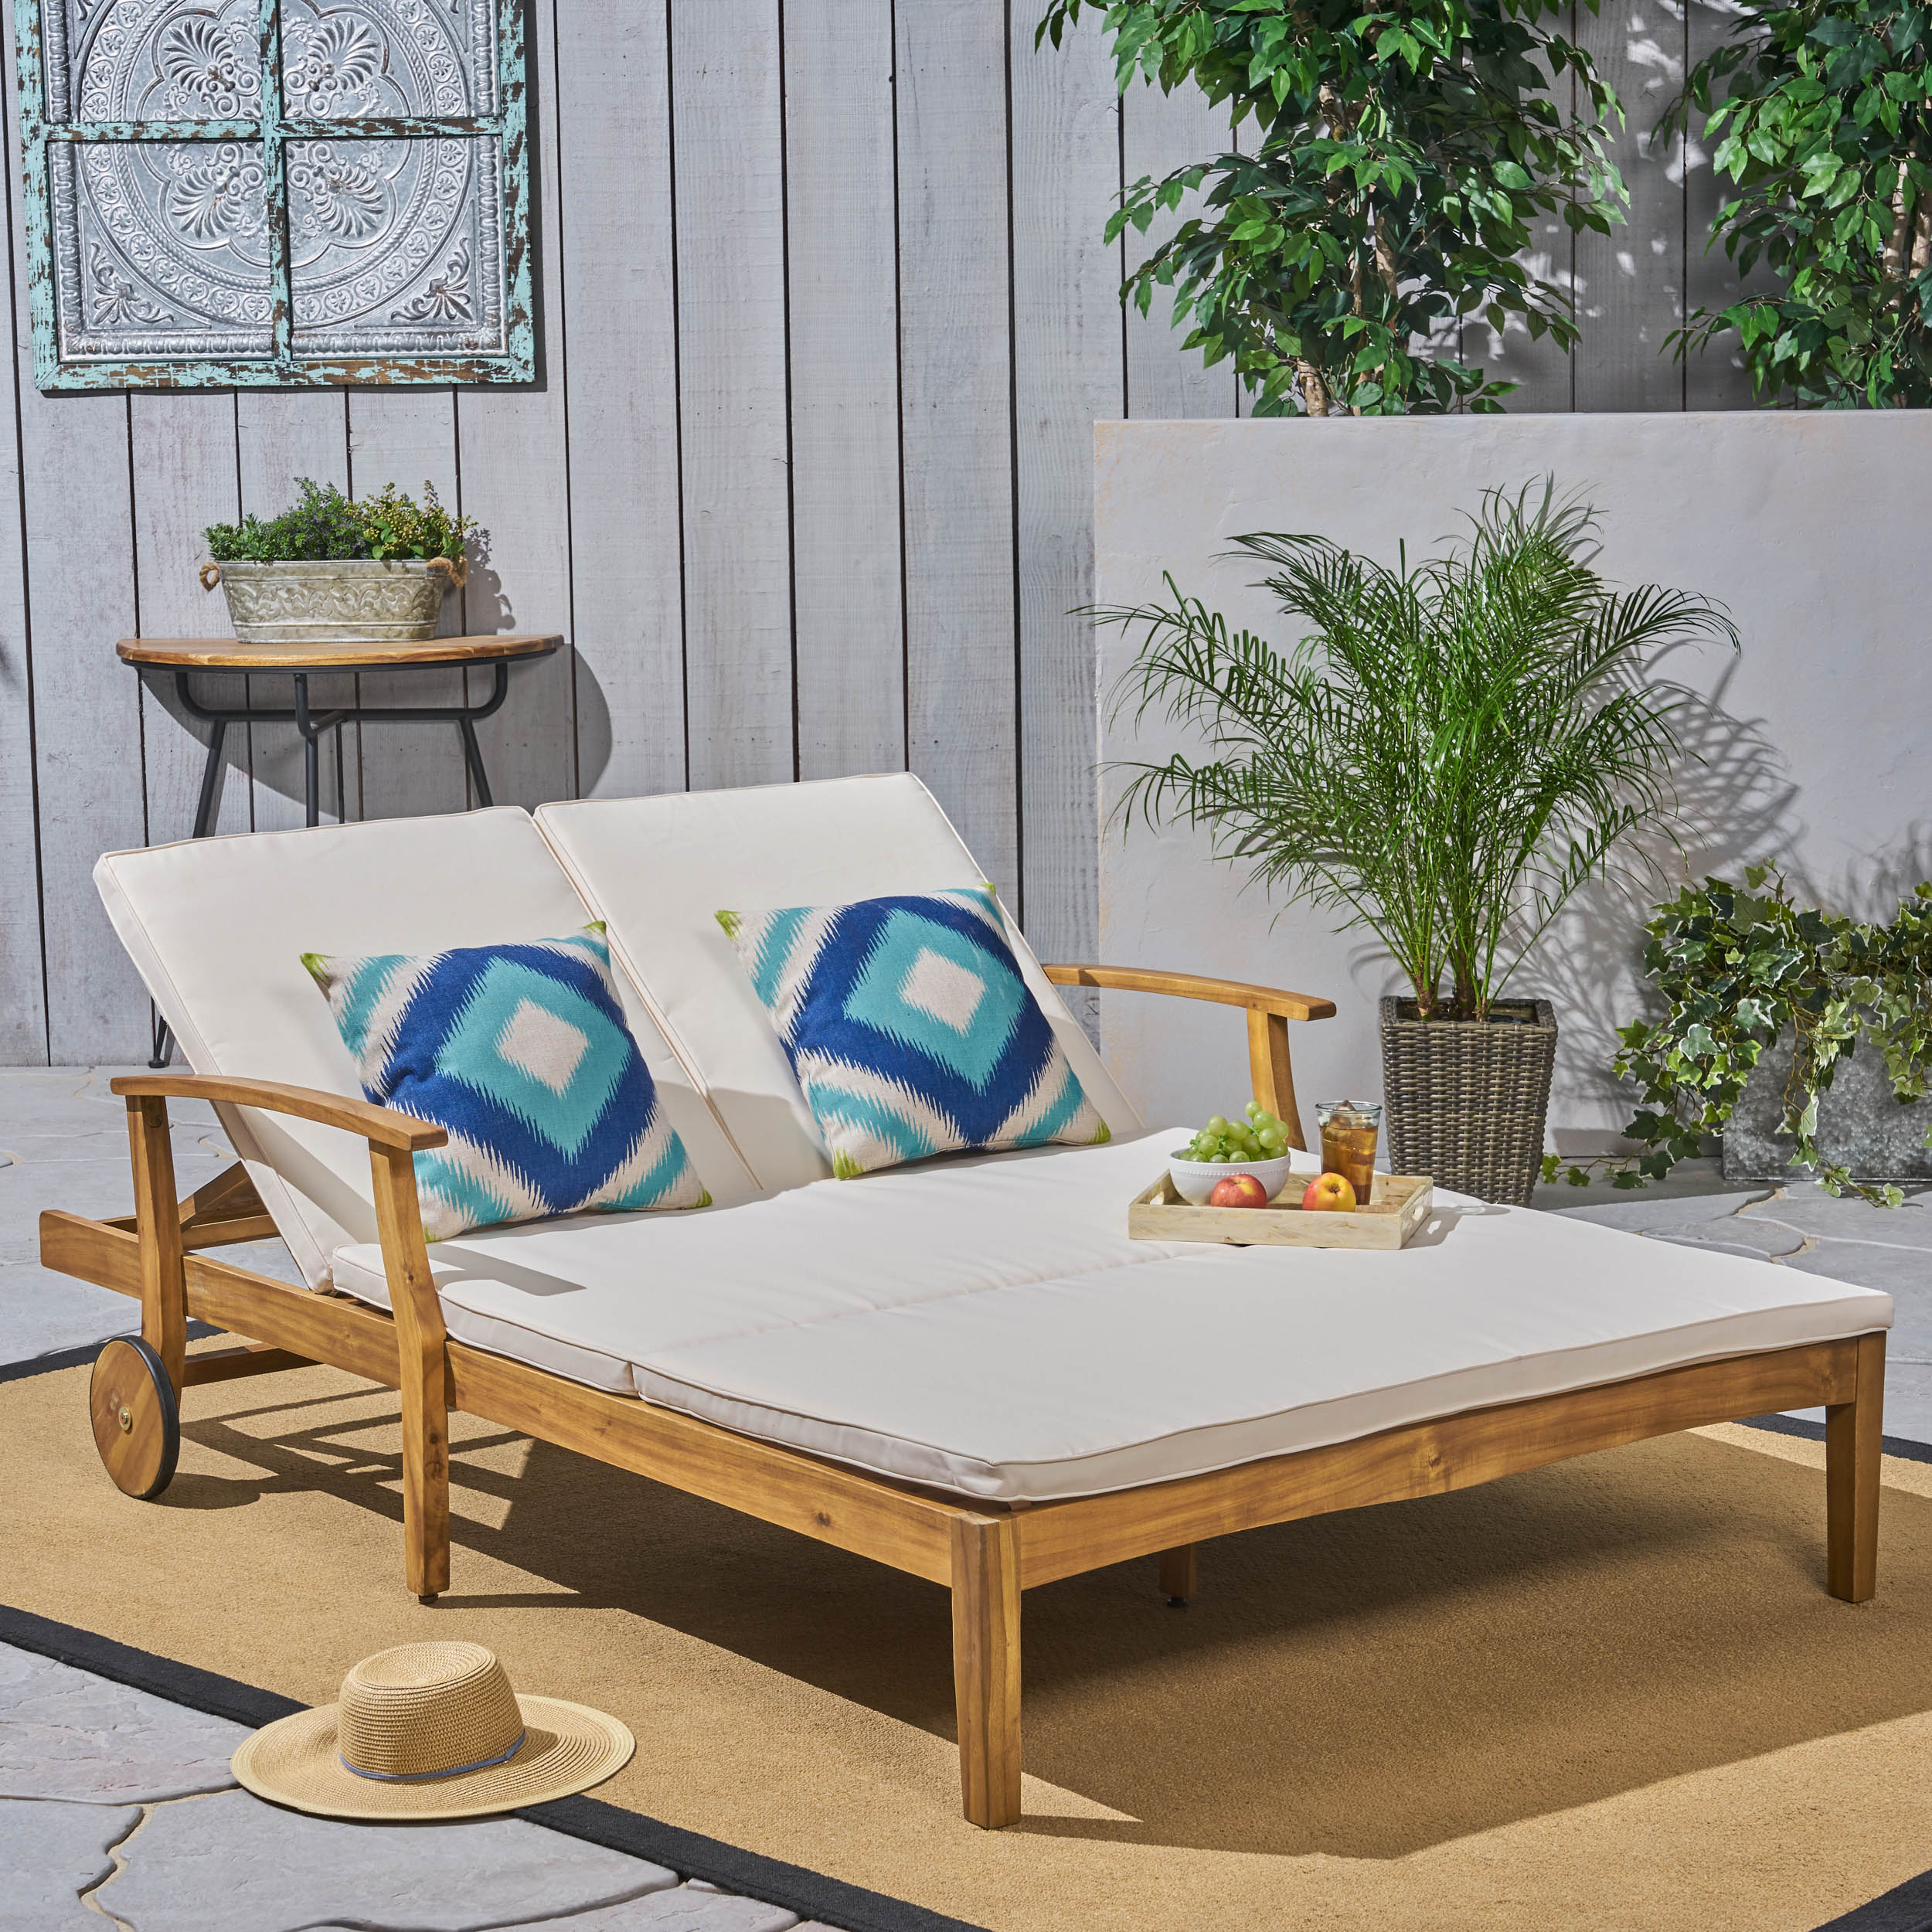 Danielle Outdoor Acacia Wood Double Chaise Lounge with Cushion, Teak, Cream - image 1 of 6